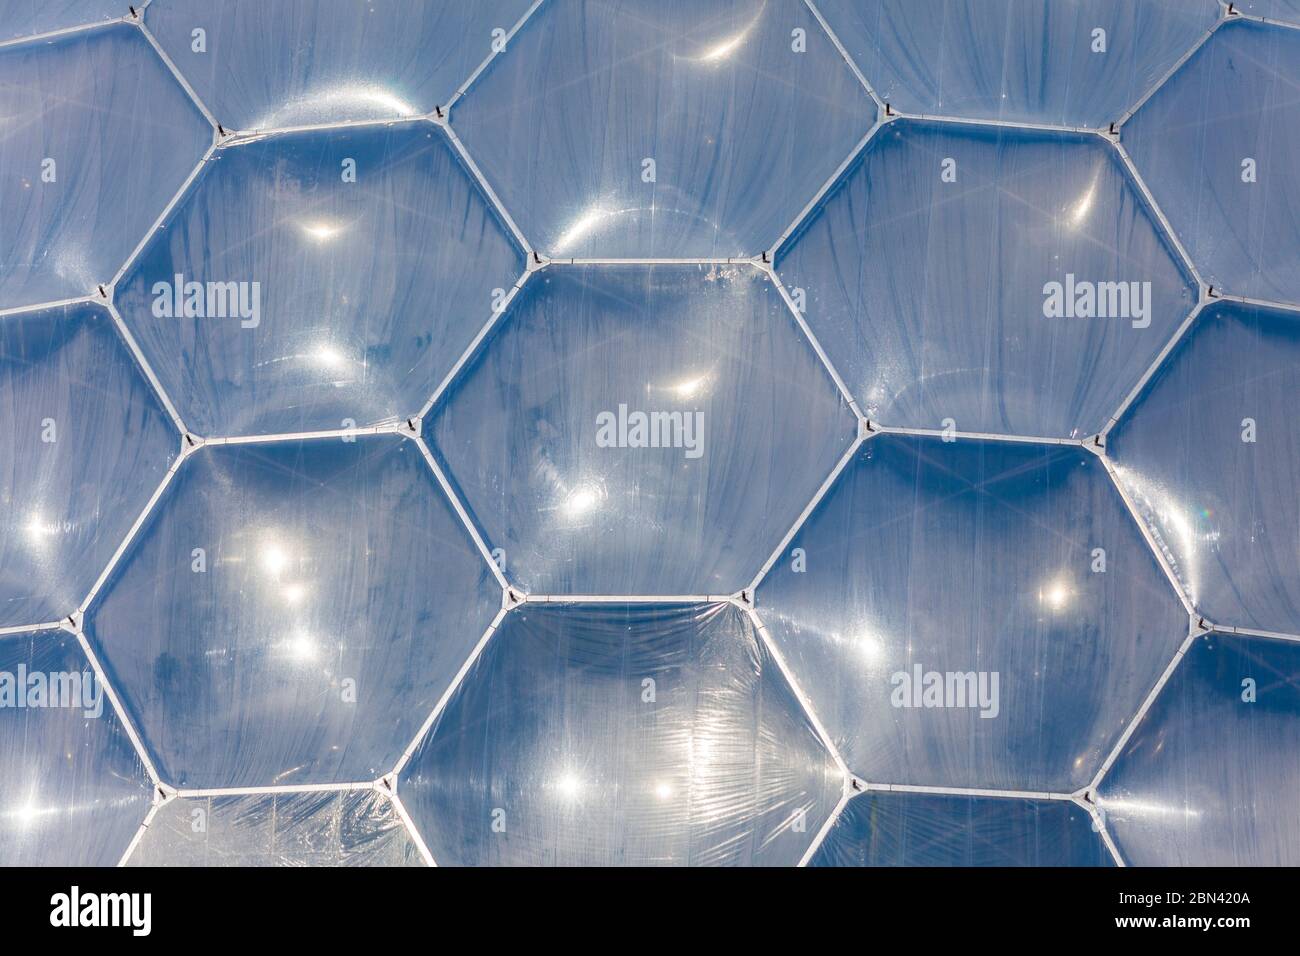 Detail of the hexagonal geodesic biome dome of the Eden Project in Cornwall, England Stock Photo